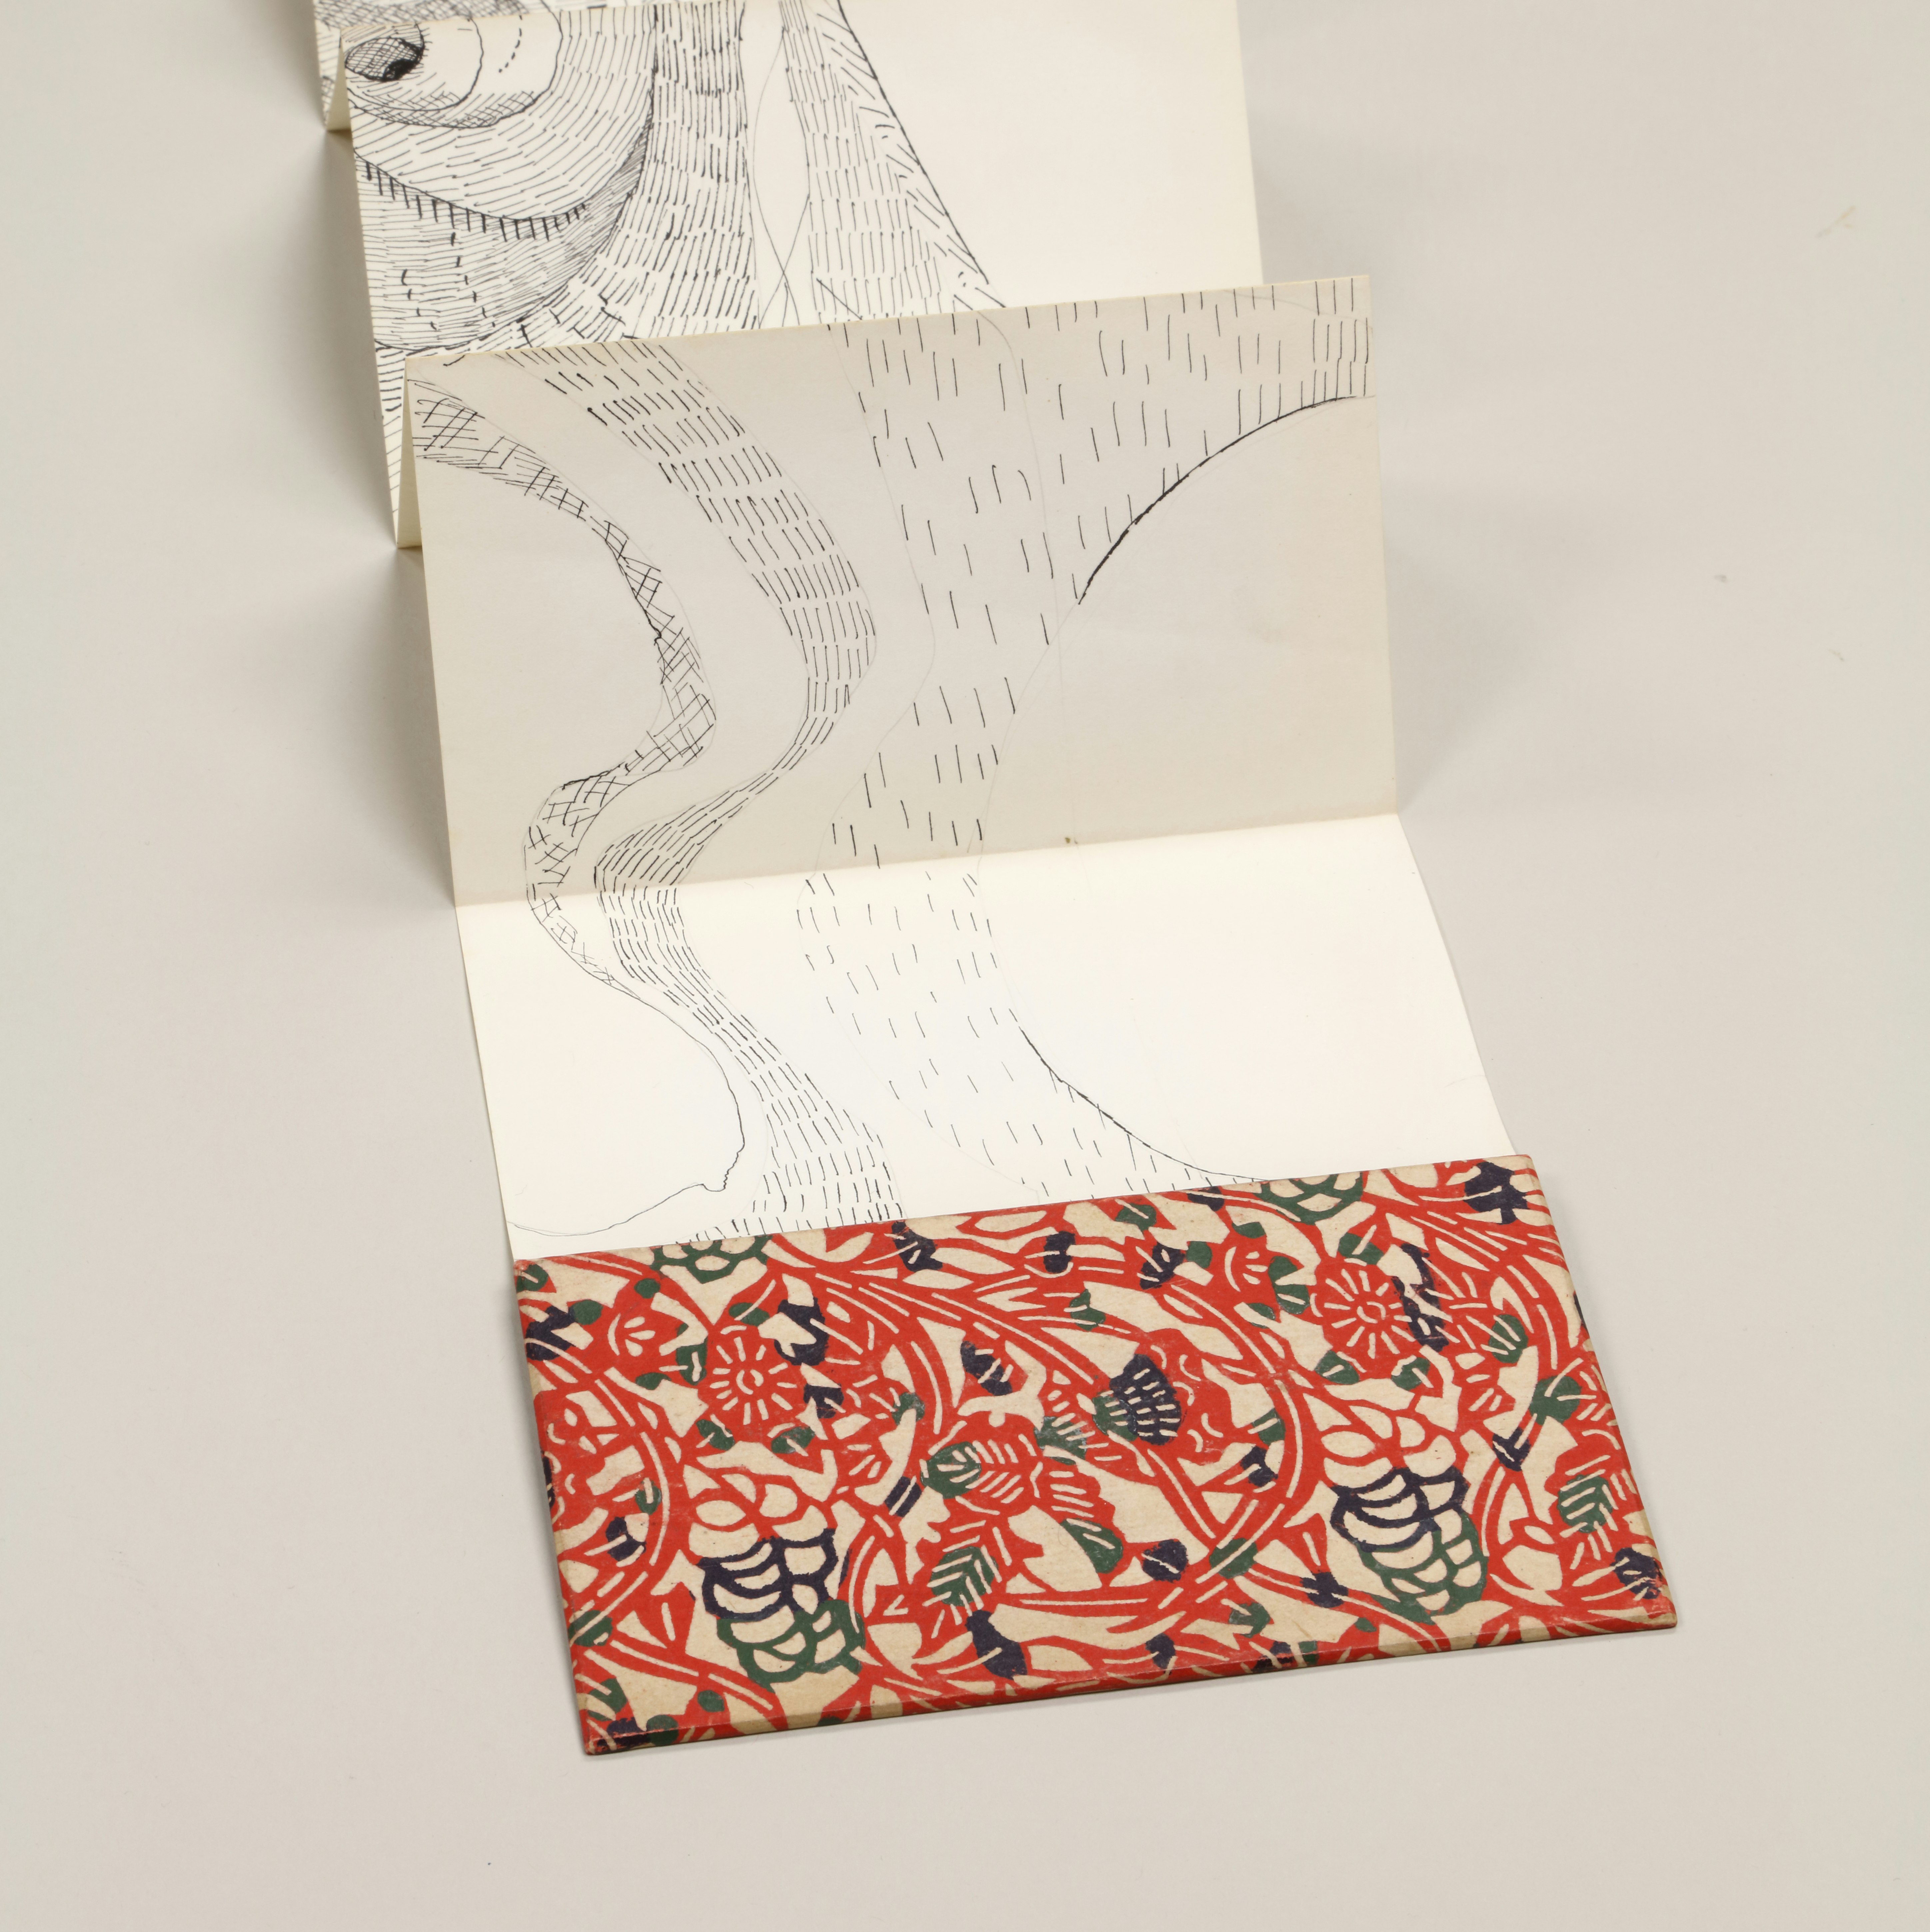 A photo of the artist's book for A Female Landscape and the Abstract Gesture.